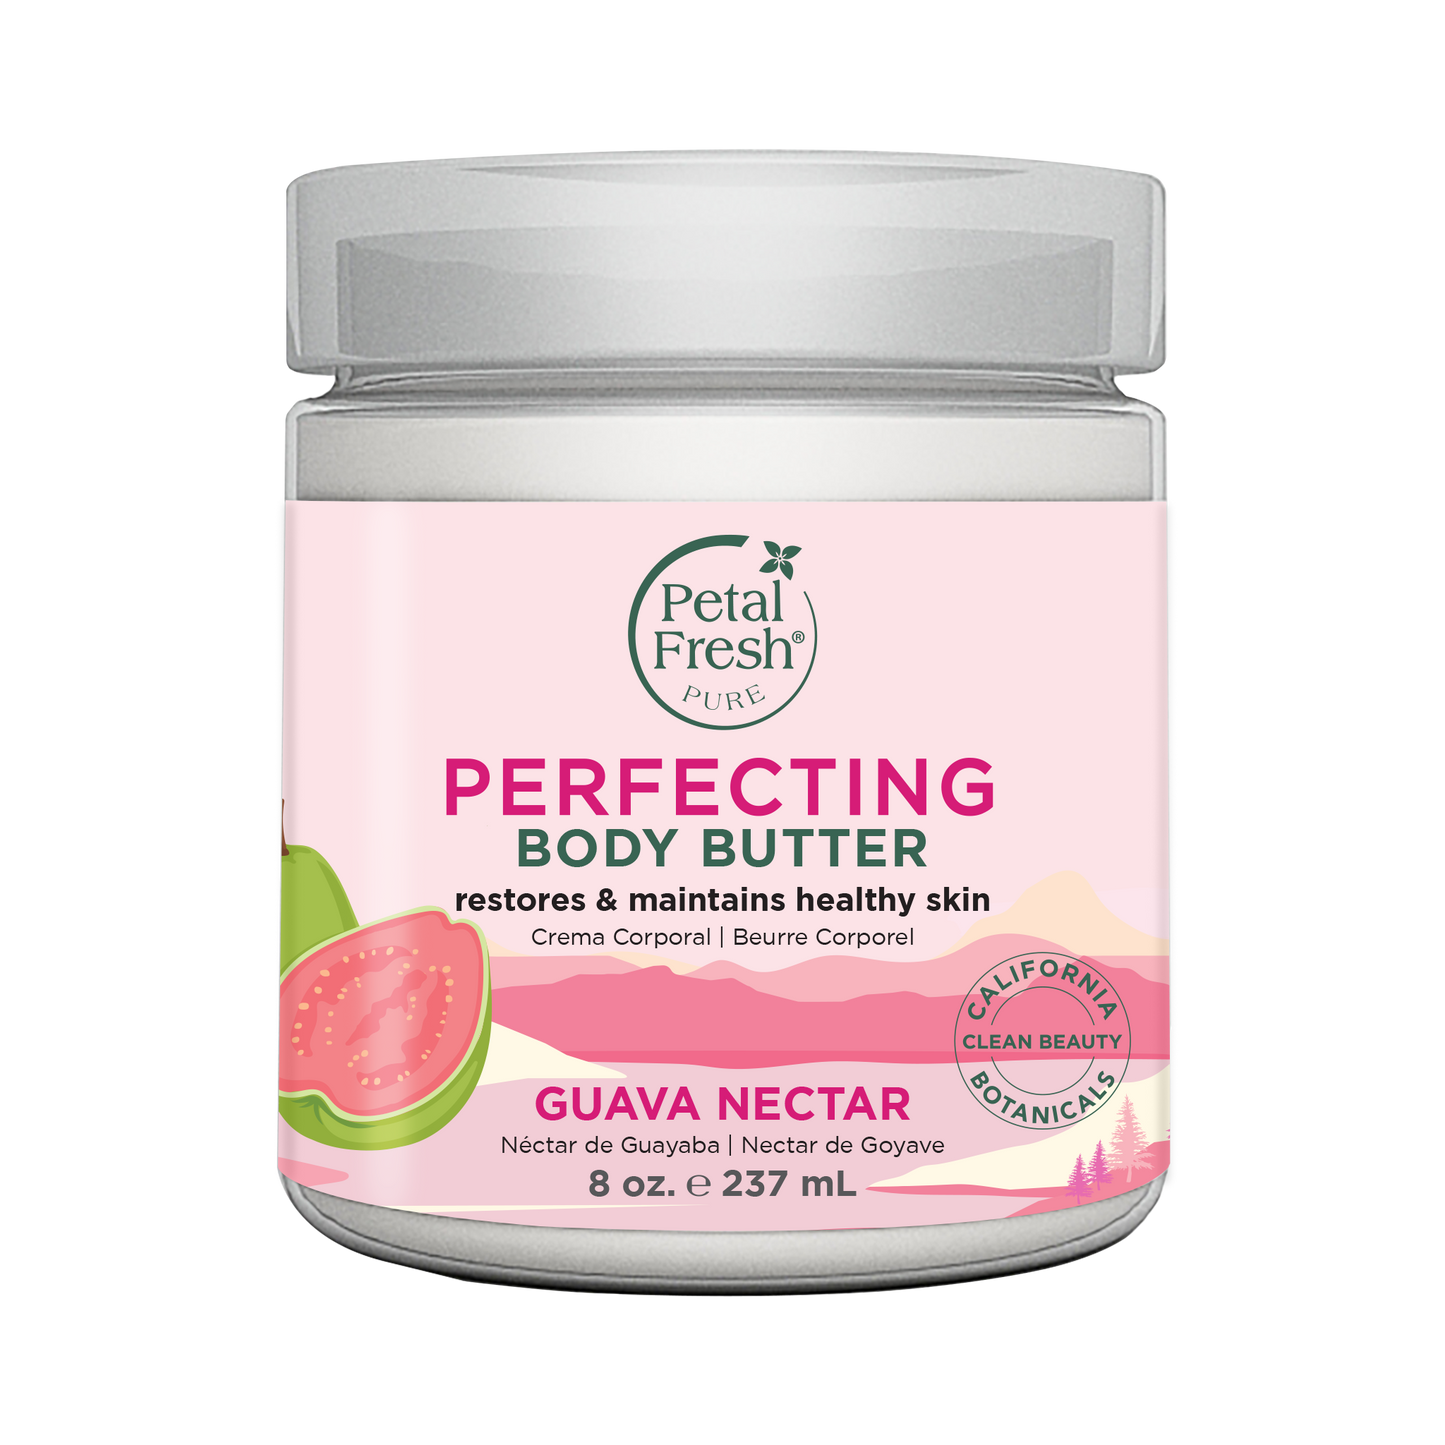 Perfecting Body Butter with Guava Nectar